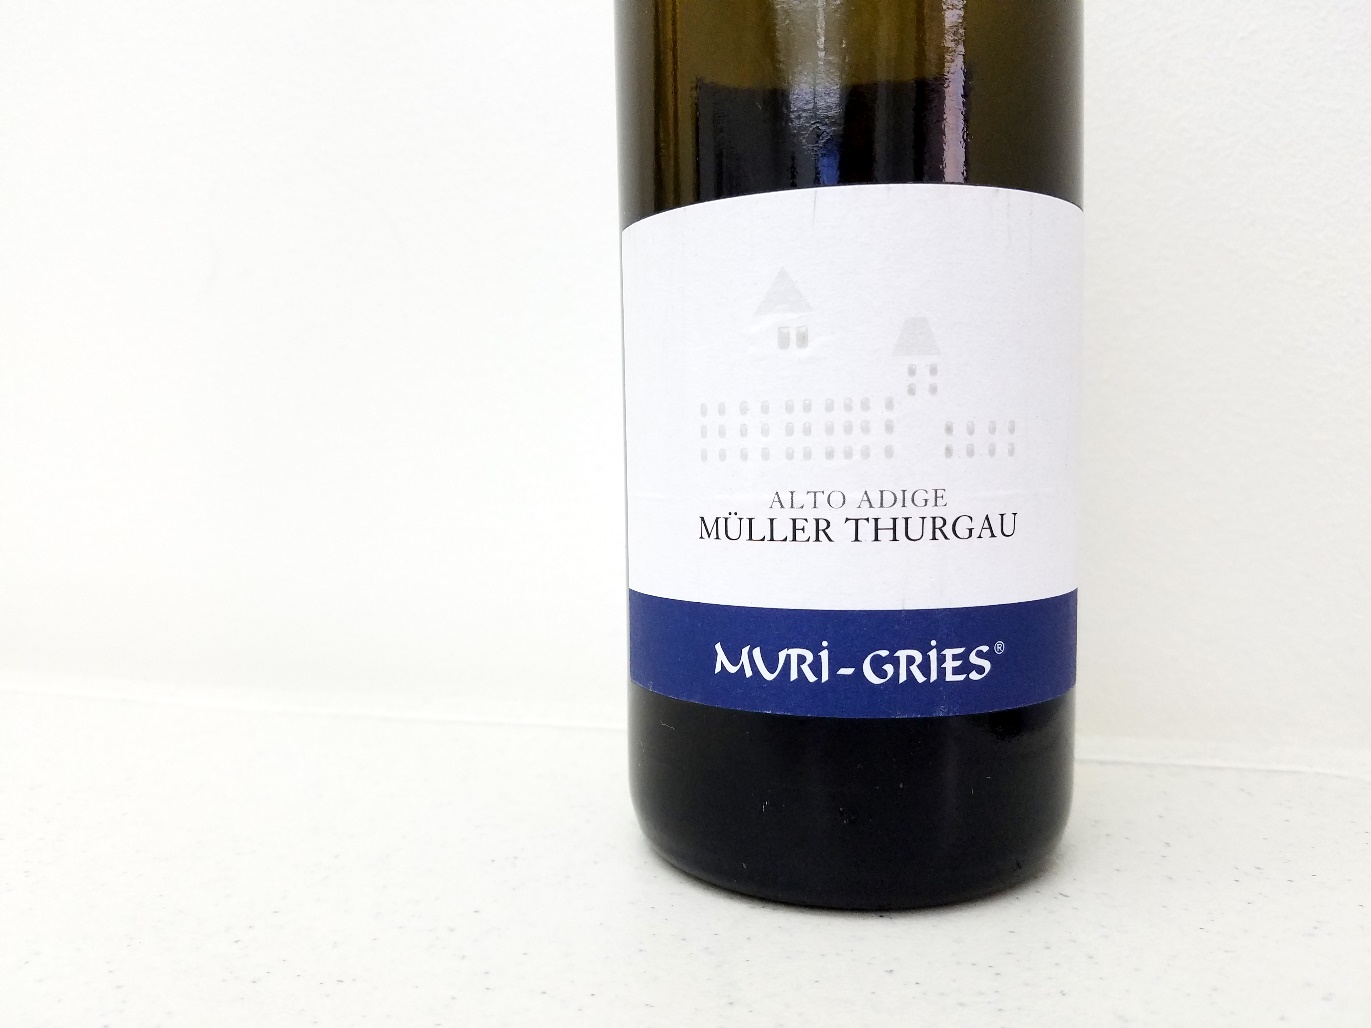 Muri-Gries, Müller Thurgau 2014, Alto Adige, Italy, Wine Casual